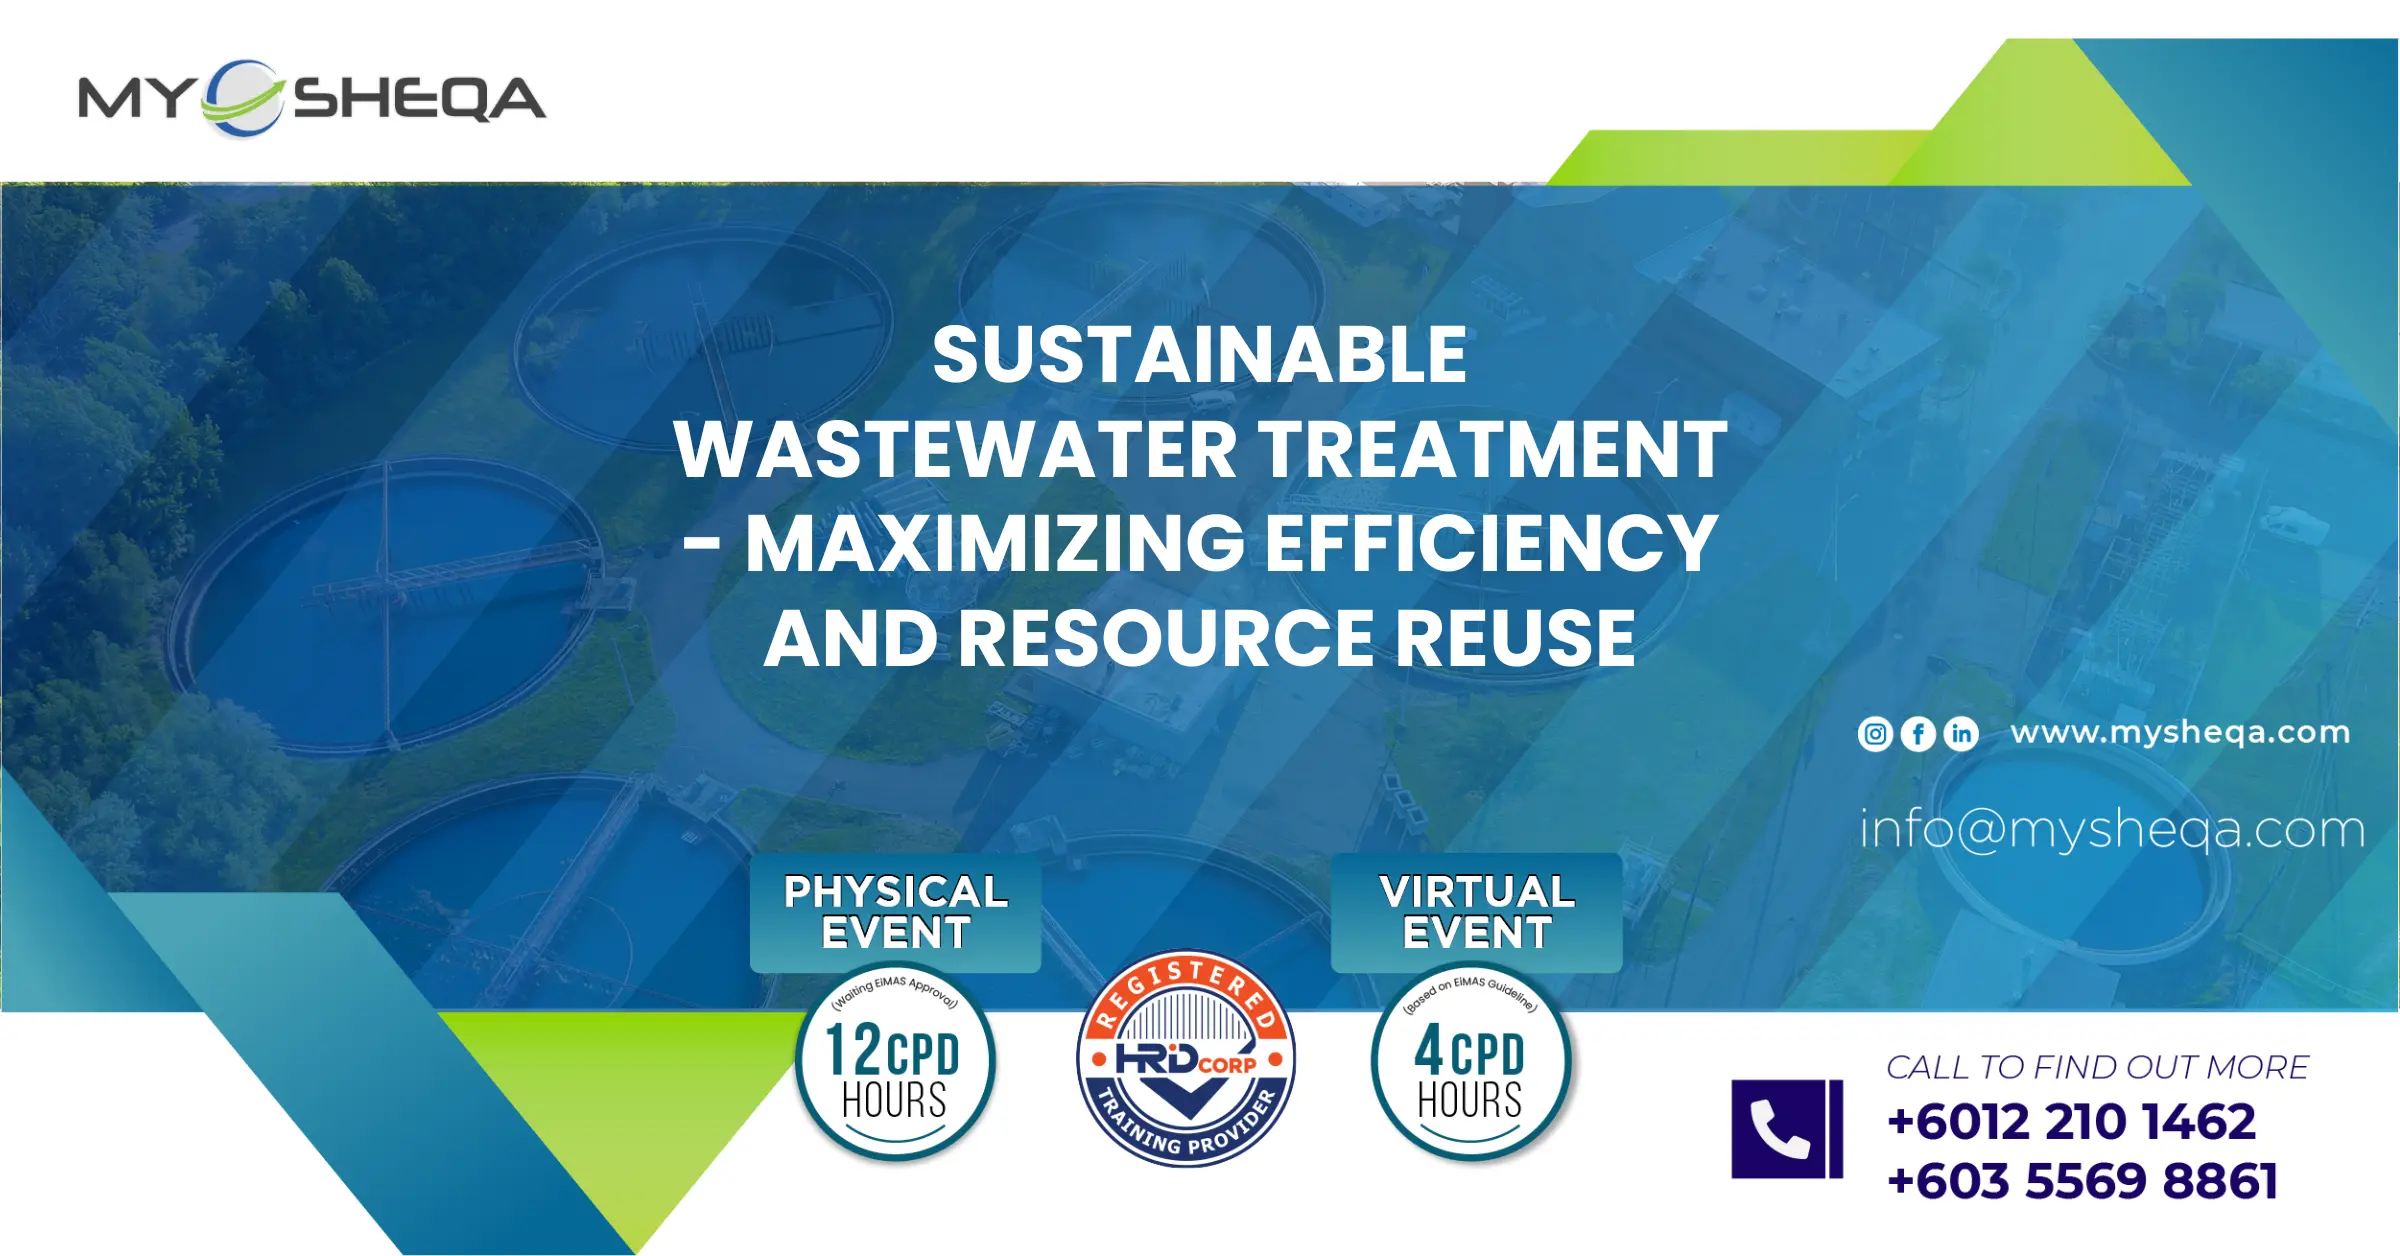 Sustainable Wastewater Treatment Maximizing Efficiency and Resource Reuse